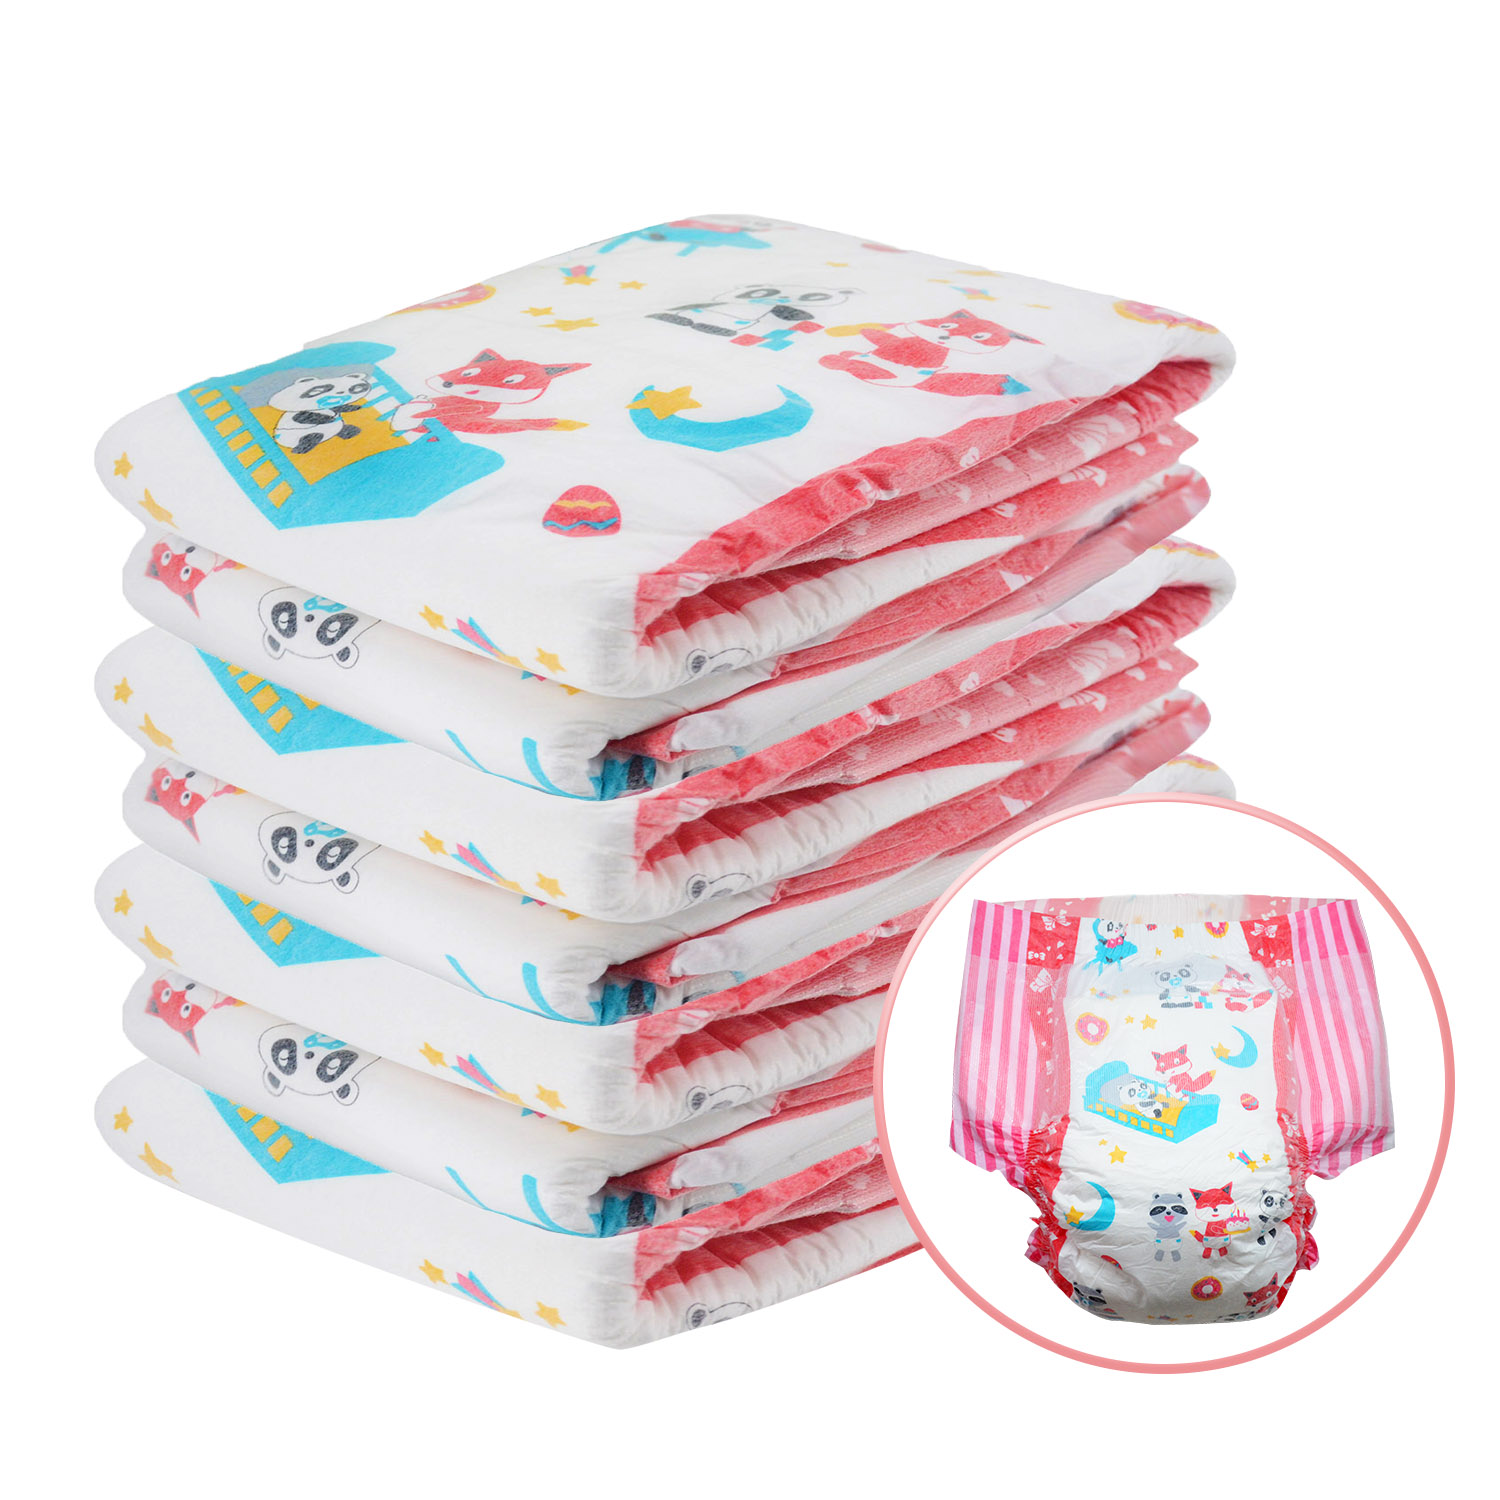 7pcs In A Pack ABDL Adult Diaper Large Size Weekly Diaper 6000ml Absorbtive DDLG Daddy Dummy Dom